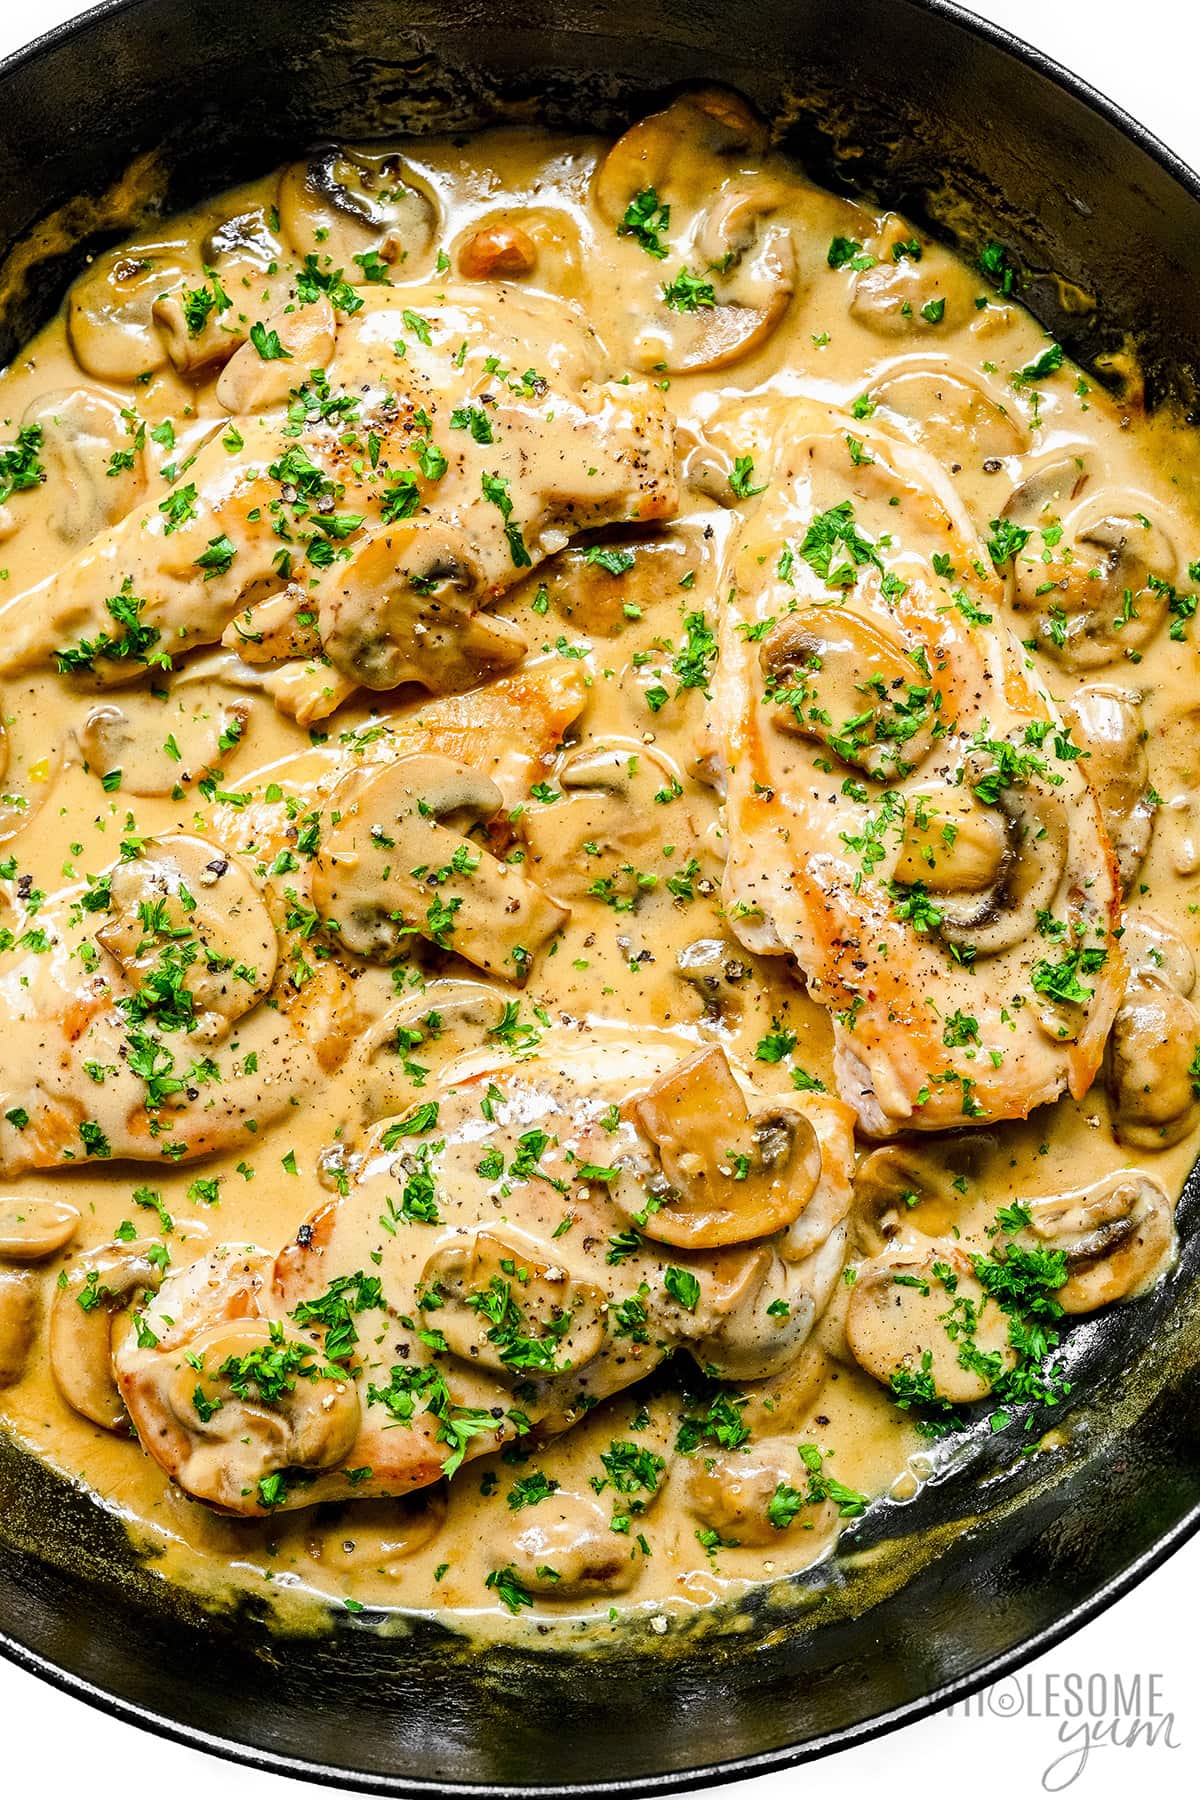 Finished chicken marsala recipe in a skillet.